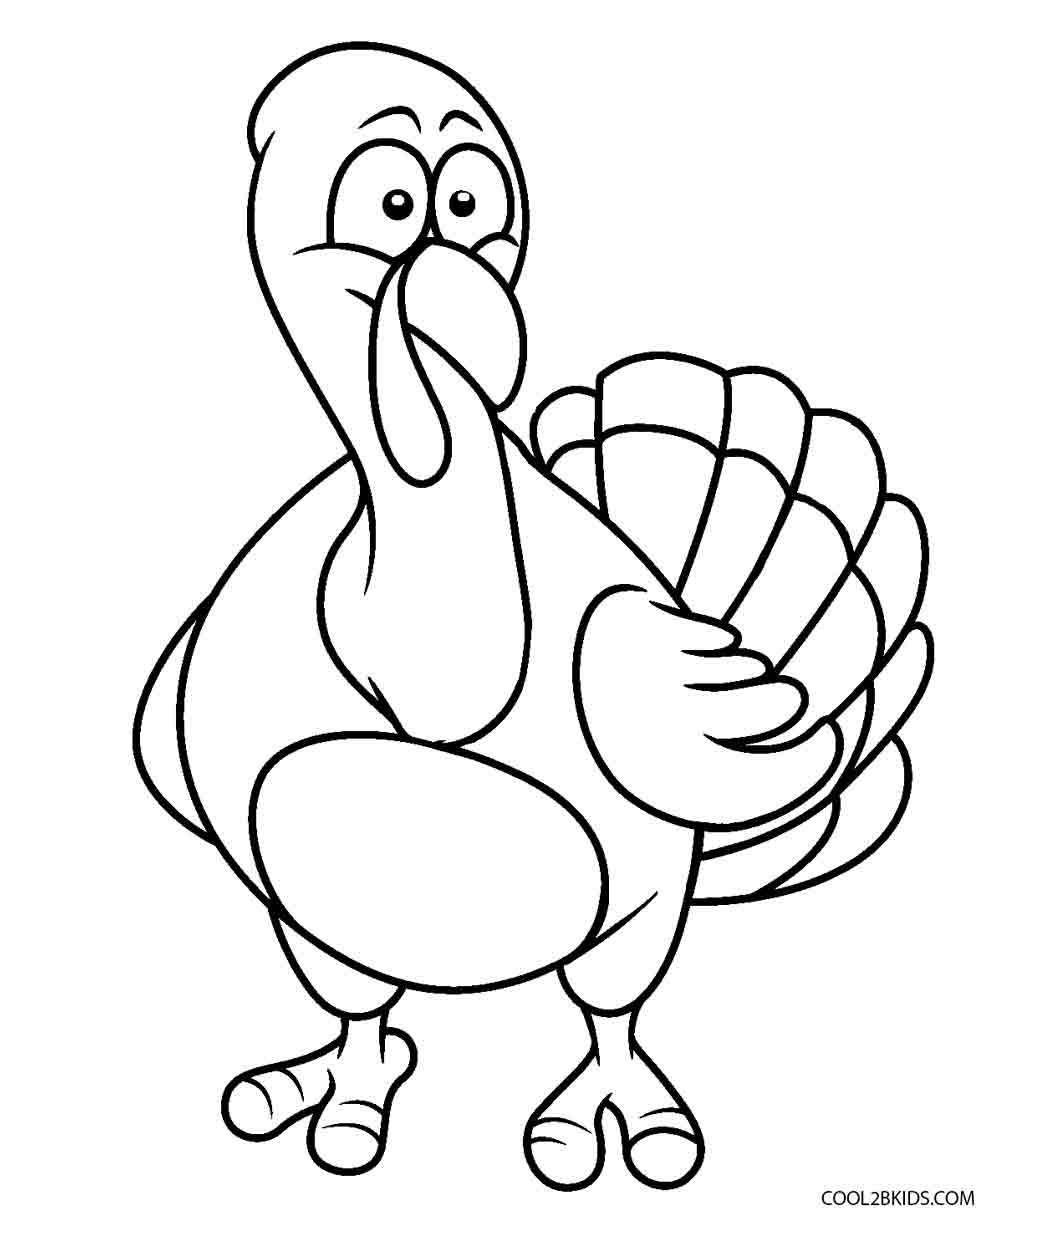 turkeys to color turkey coloring pages for kids pitara kids network to turkeys color 